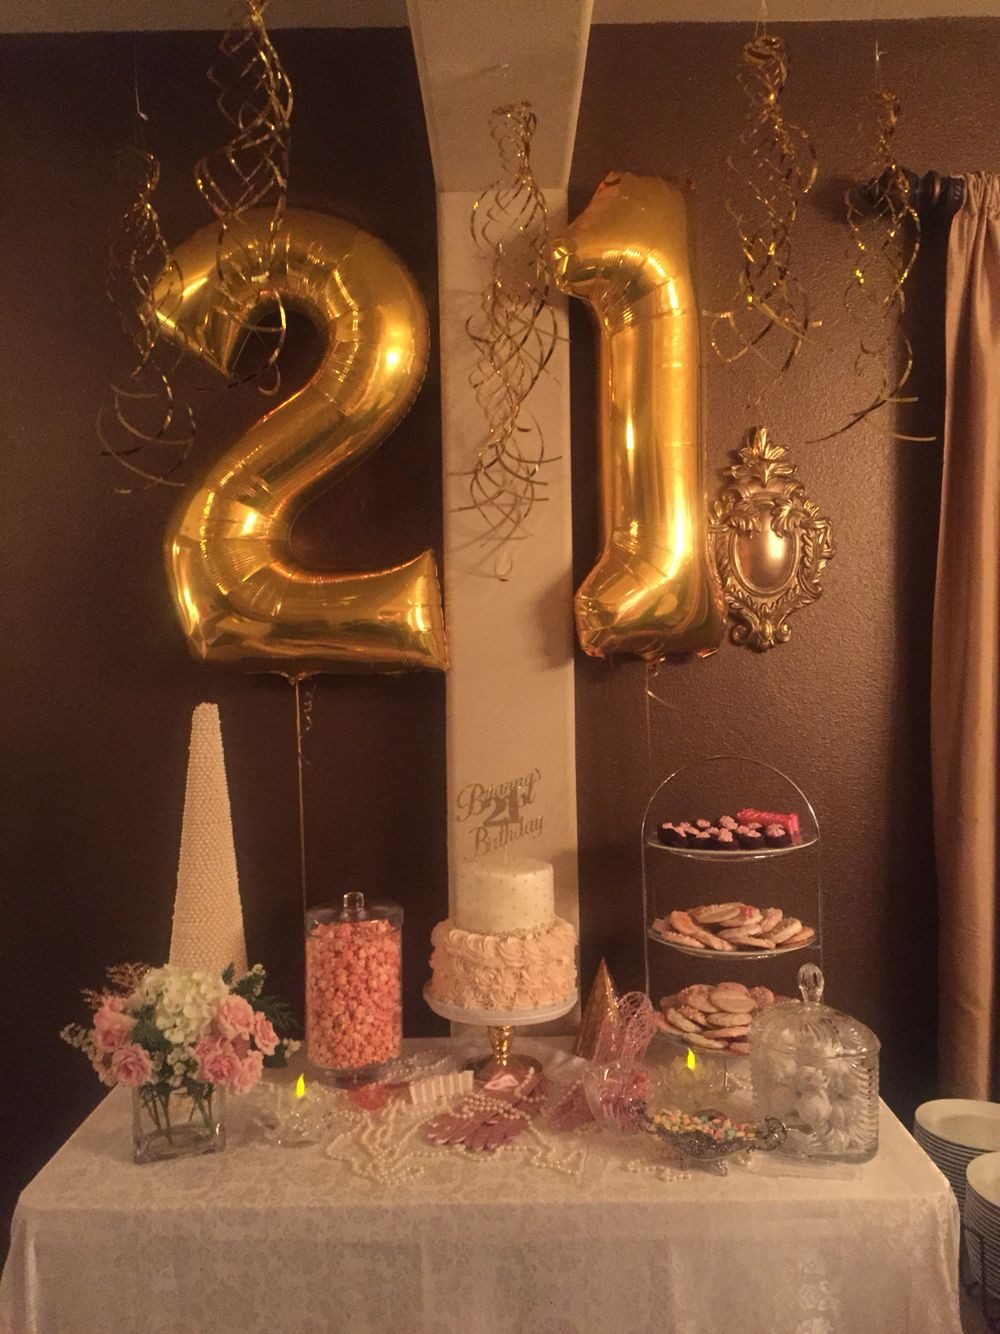 The 30 Best Ideas for 21st Birthday Party themes Home, Family, Style